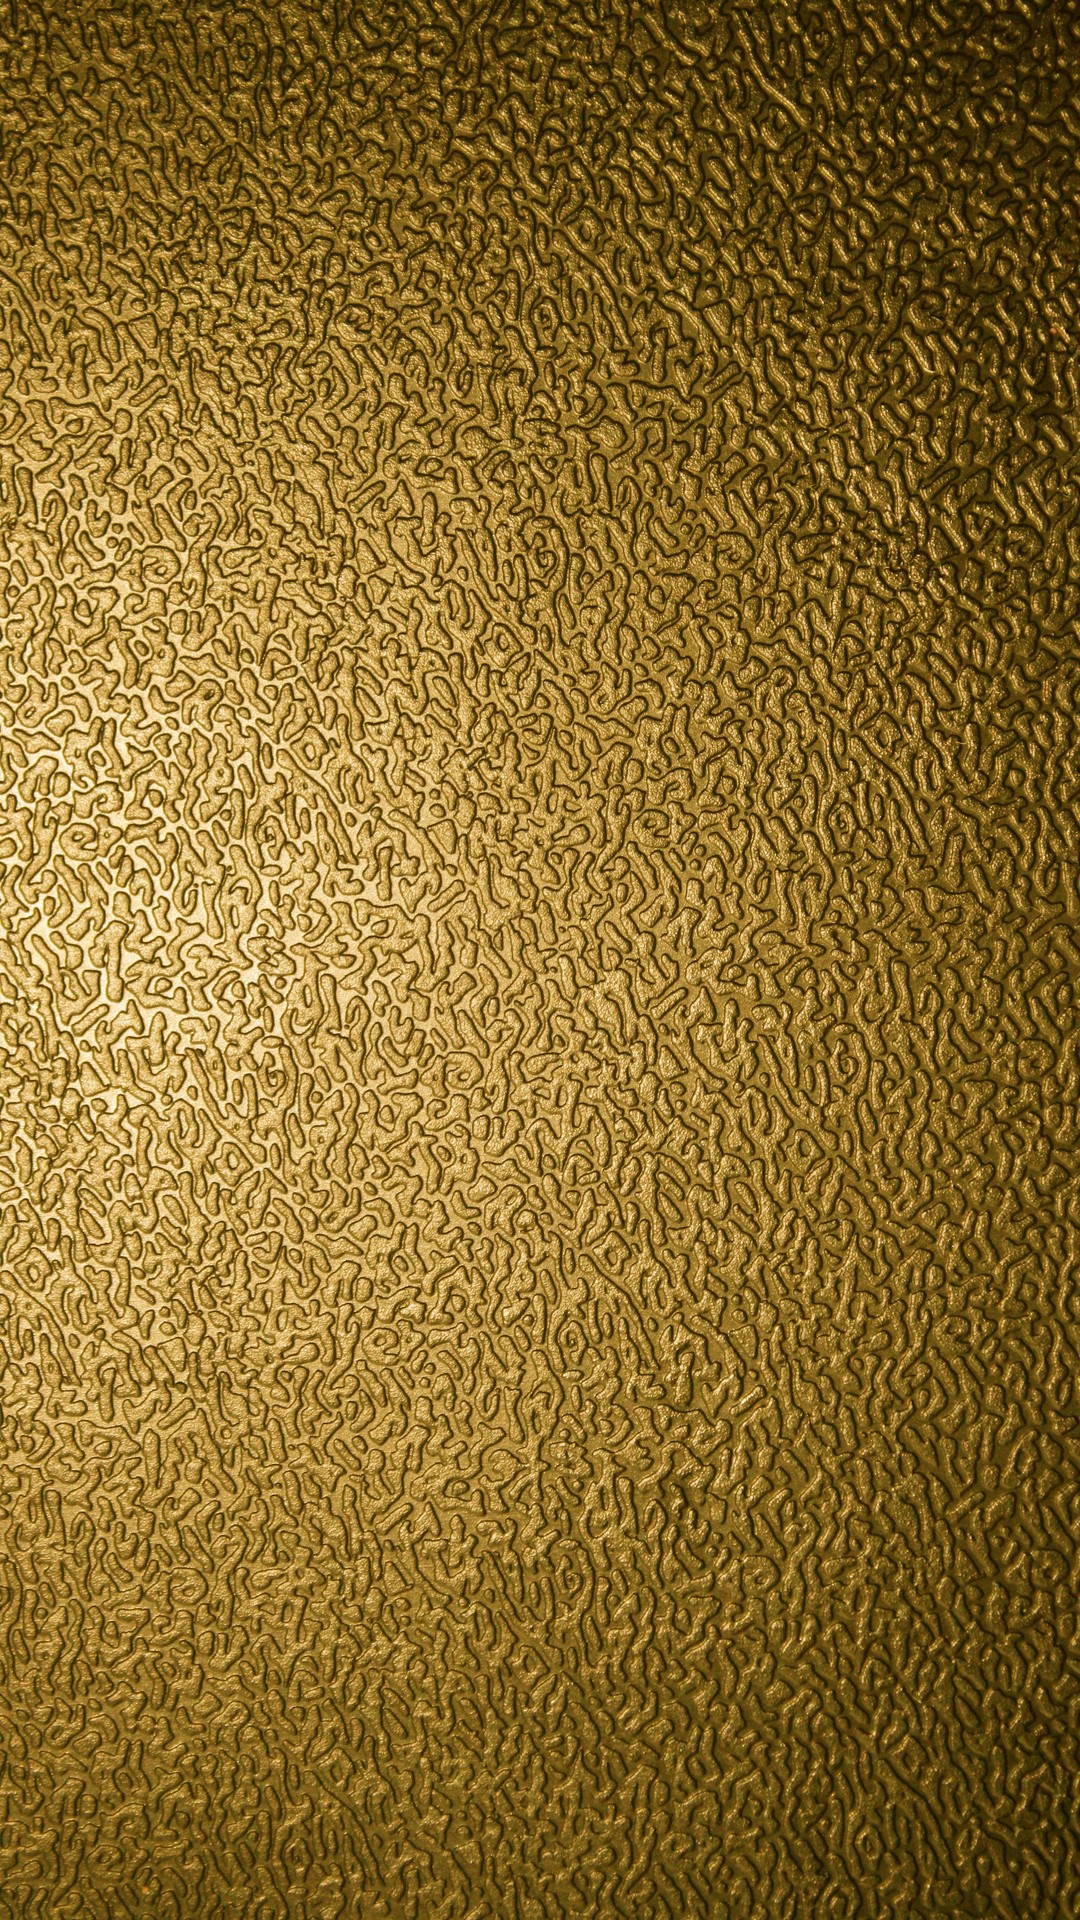 Gold Pattern Android Wallpaper With Hd Resolution - HD Wallpaper 